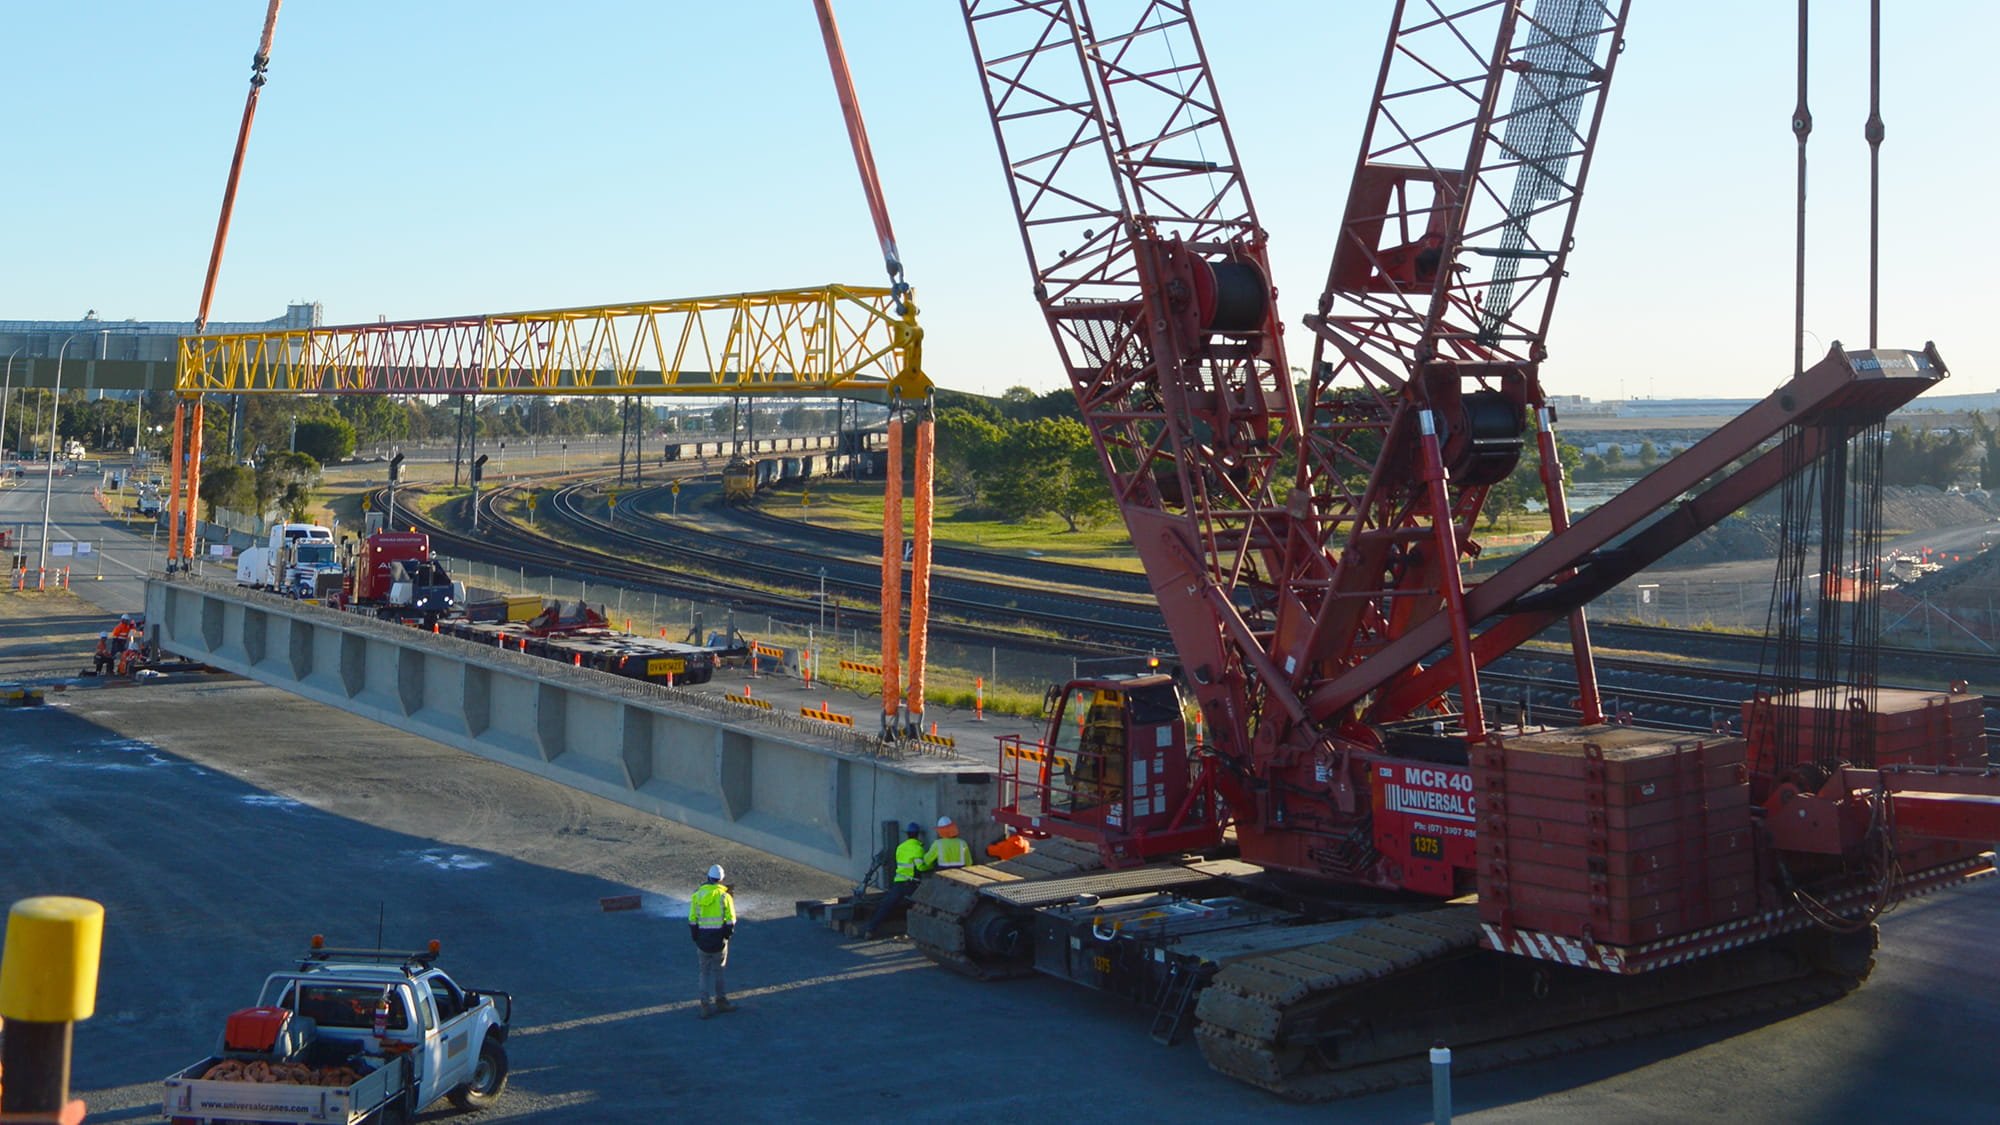 A 46m Quickcell Super Girder is unloaded at the Port of Brisbane as part of the Port Drive Upgrade project